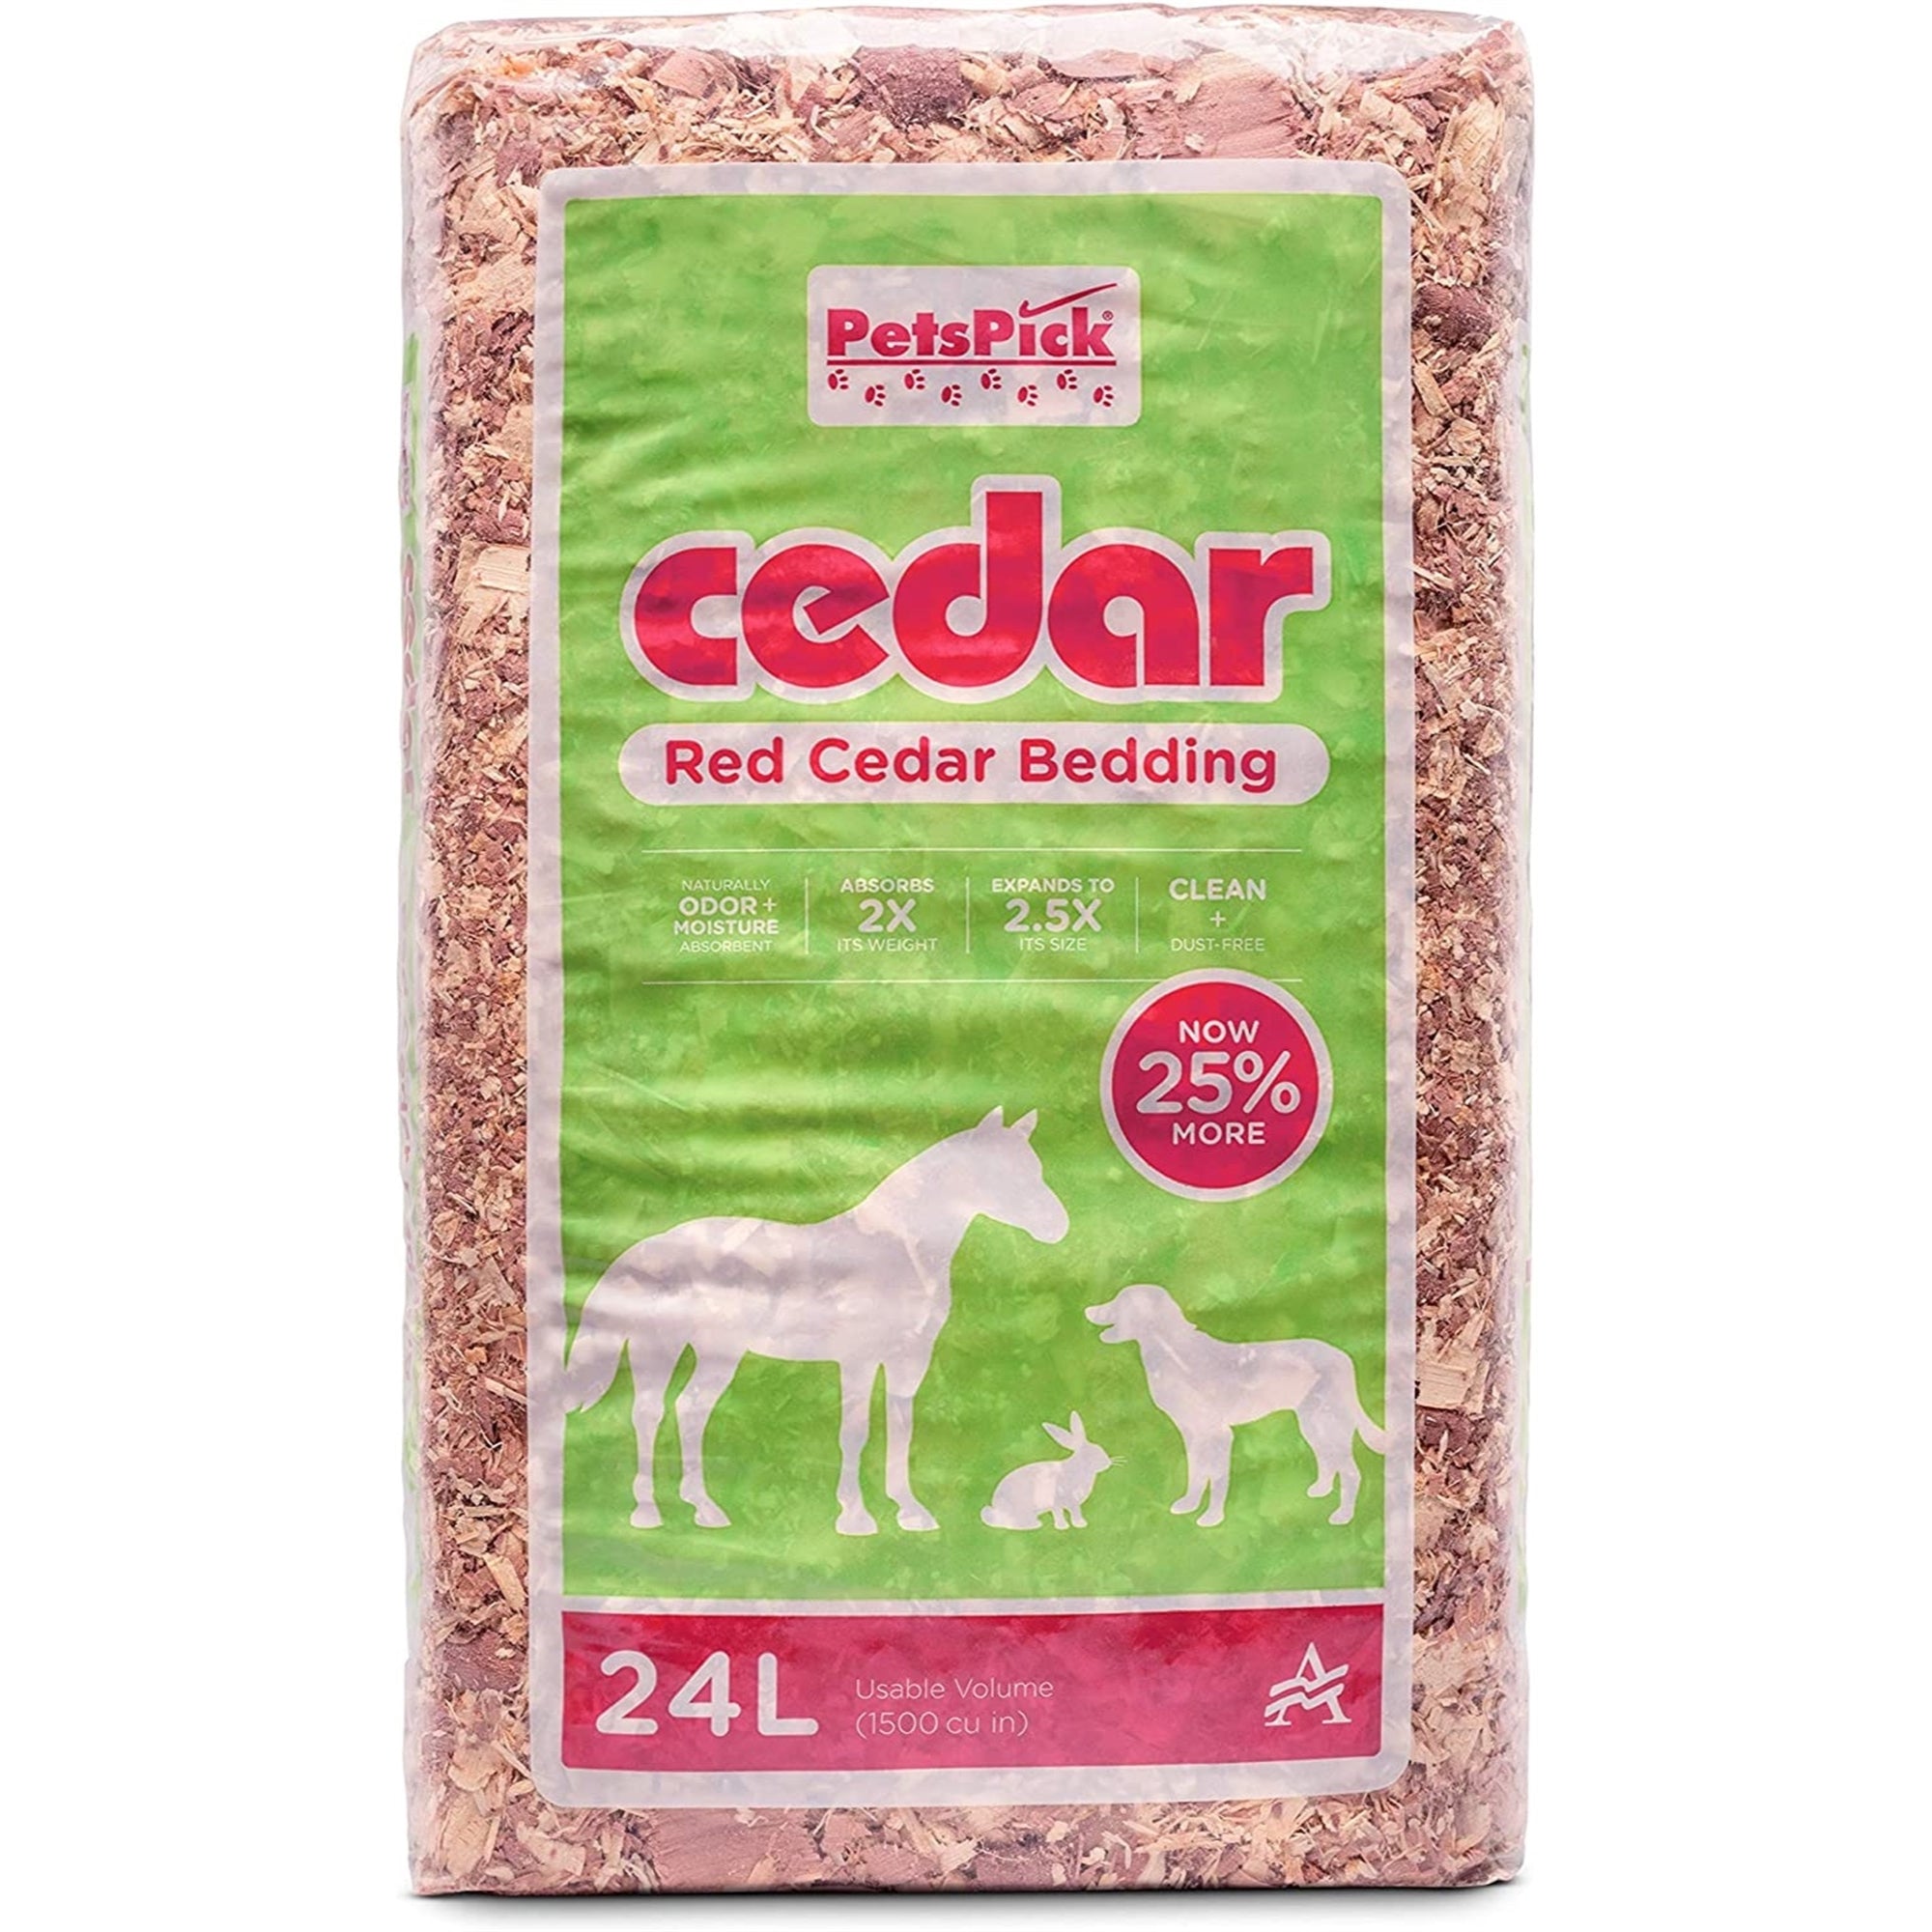 PetsPick Red Cedar Pet Bedding for Dogs, Horses, Small Animals, 24L